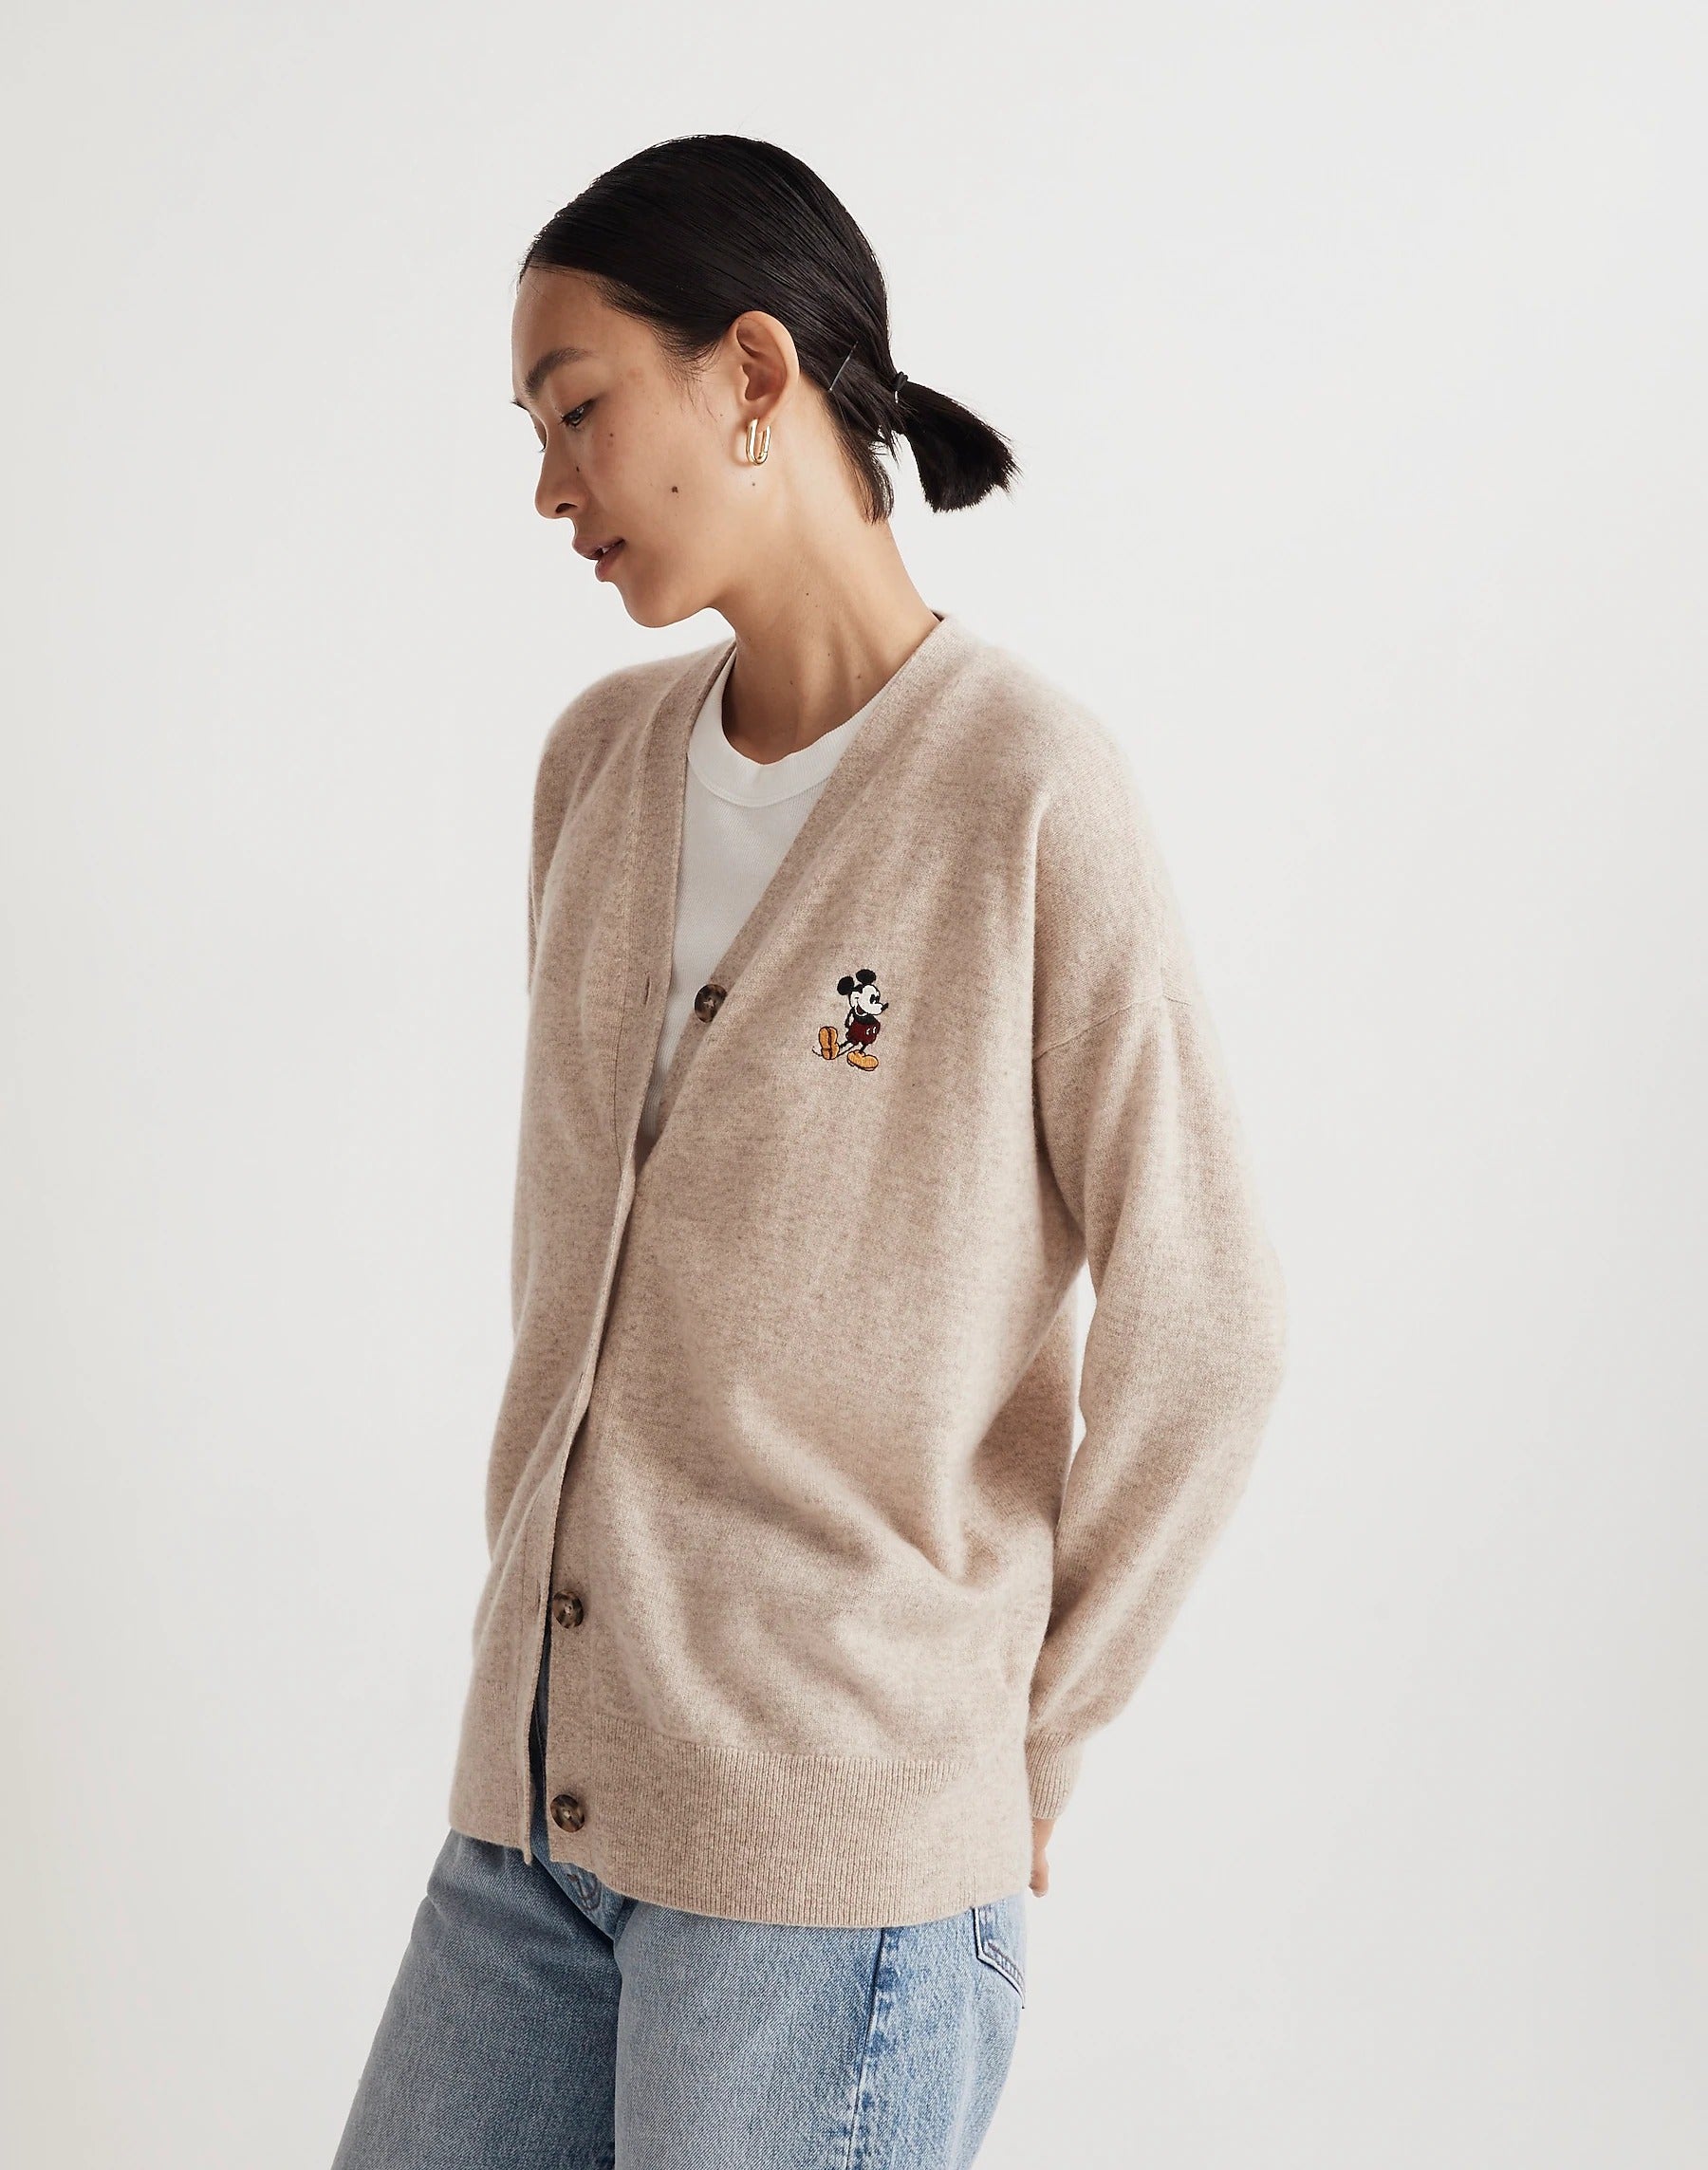 a model in a tan cardigan with a tiny mickey mouse embroidered on it